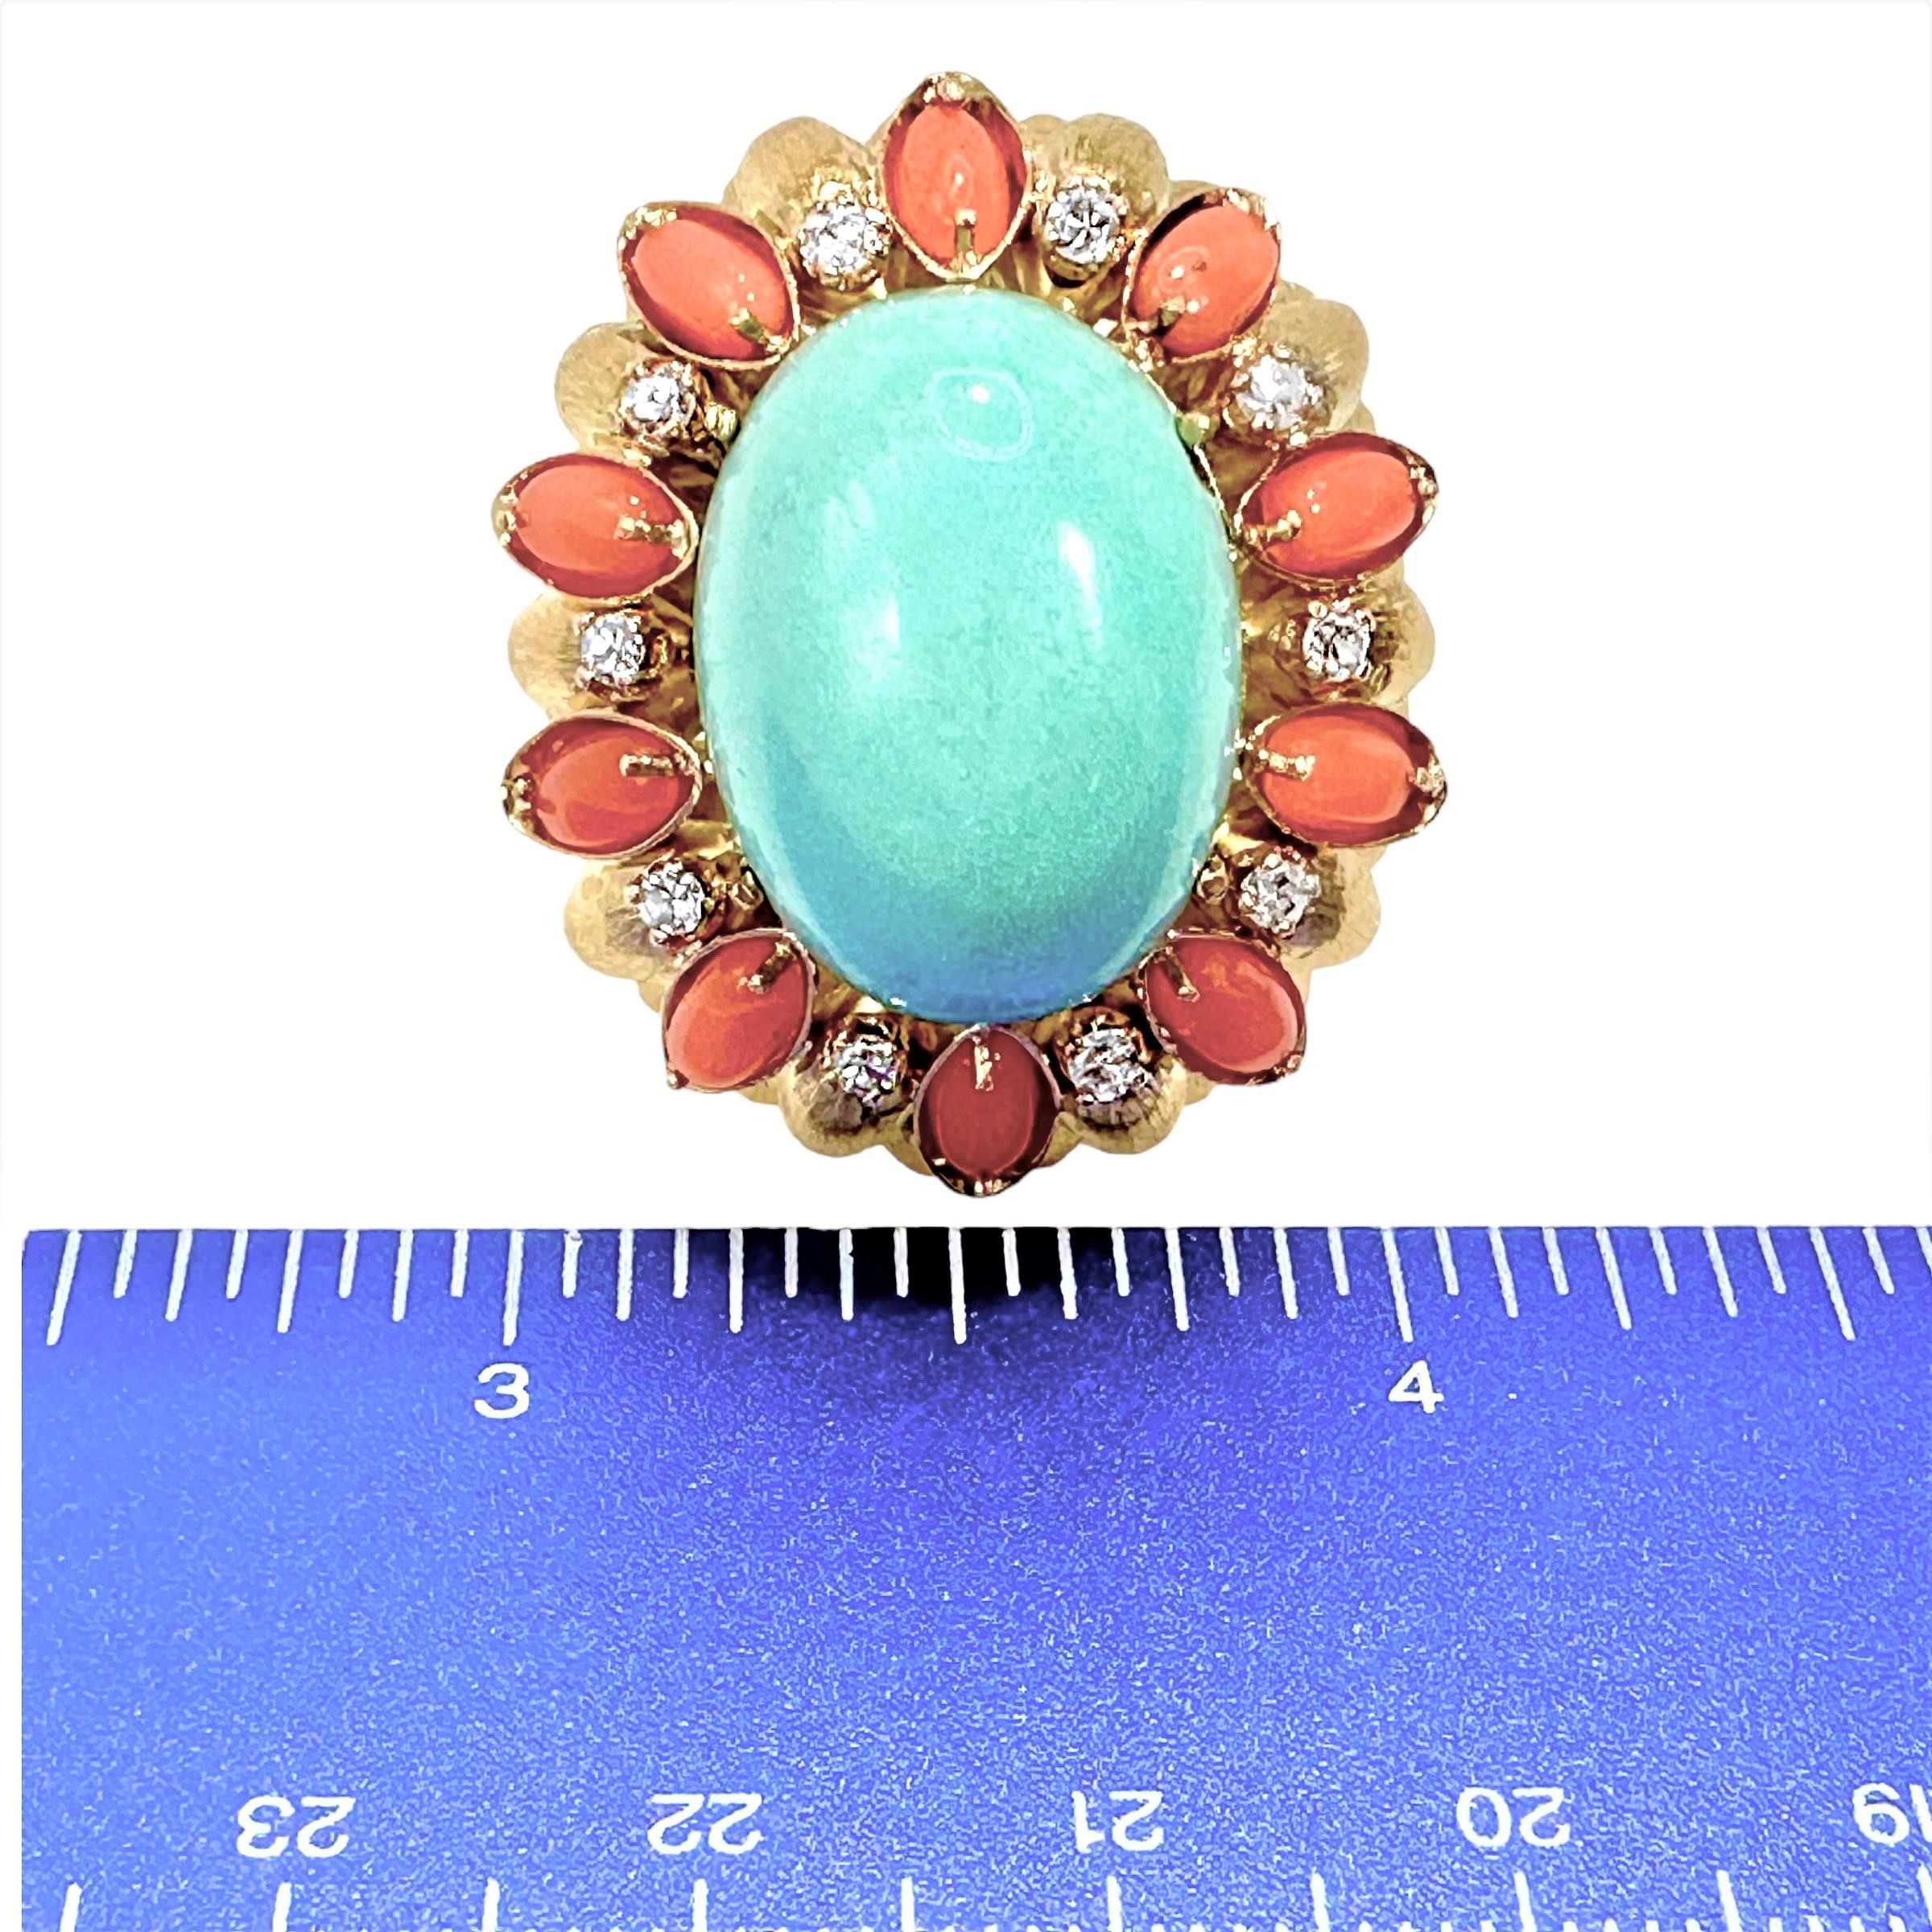 Large Scale Mid-20th Century 18K Yellow Gold, Coral, Turquoise and Diamond Ring 1